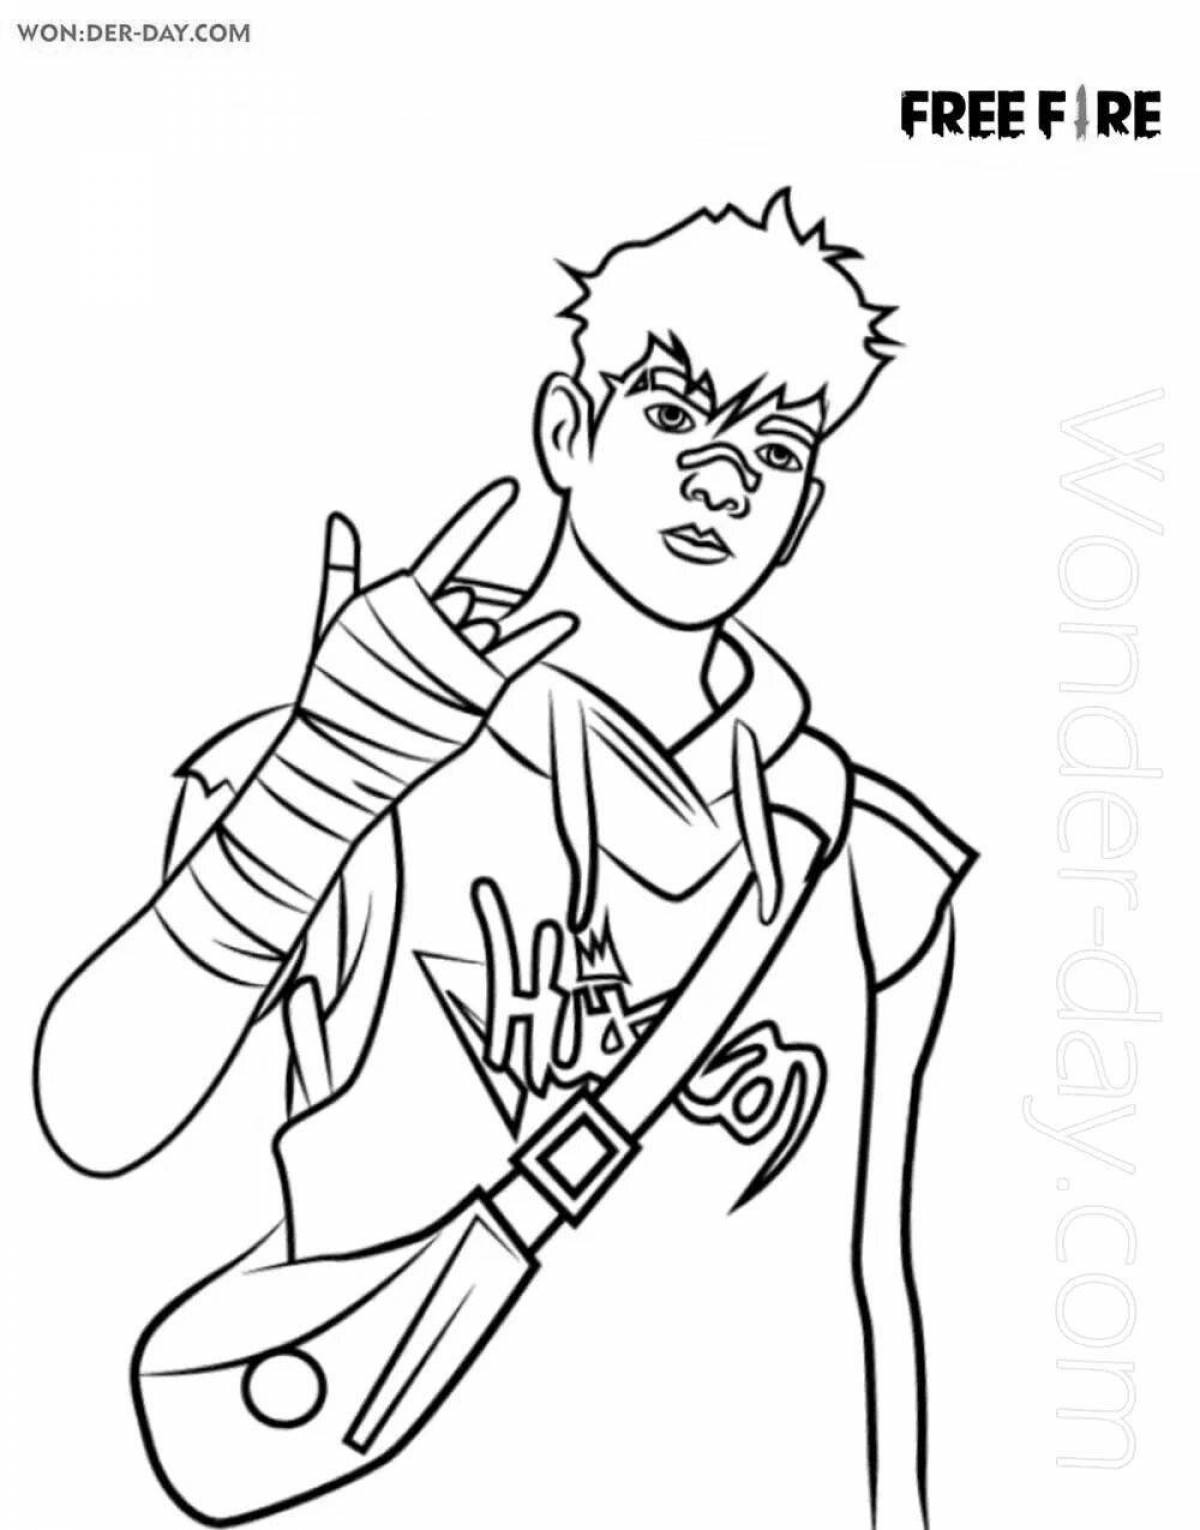 Exquisite weapon pro free fire coloring page